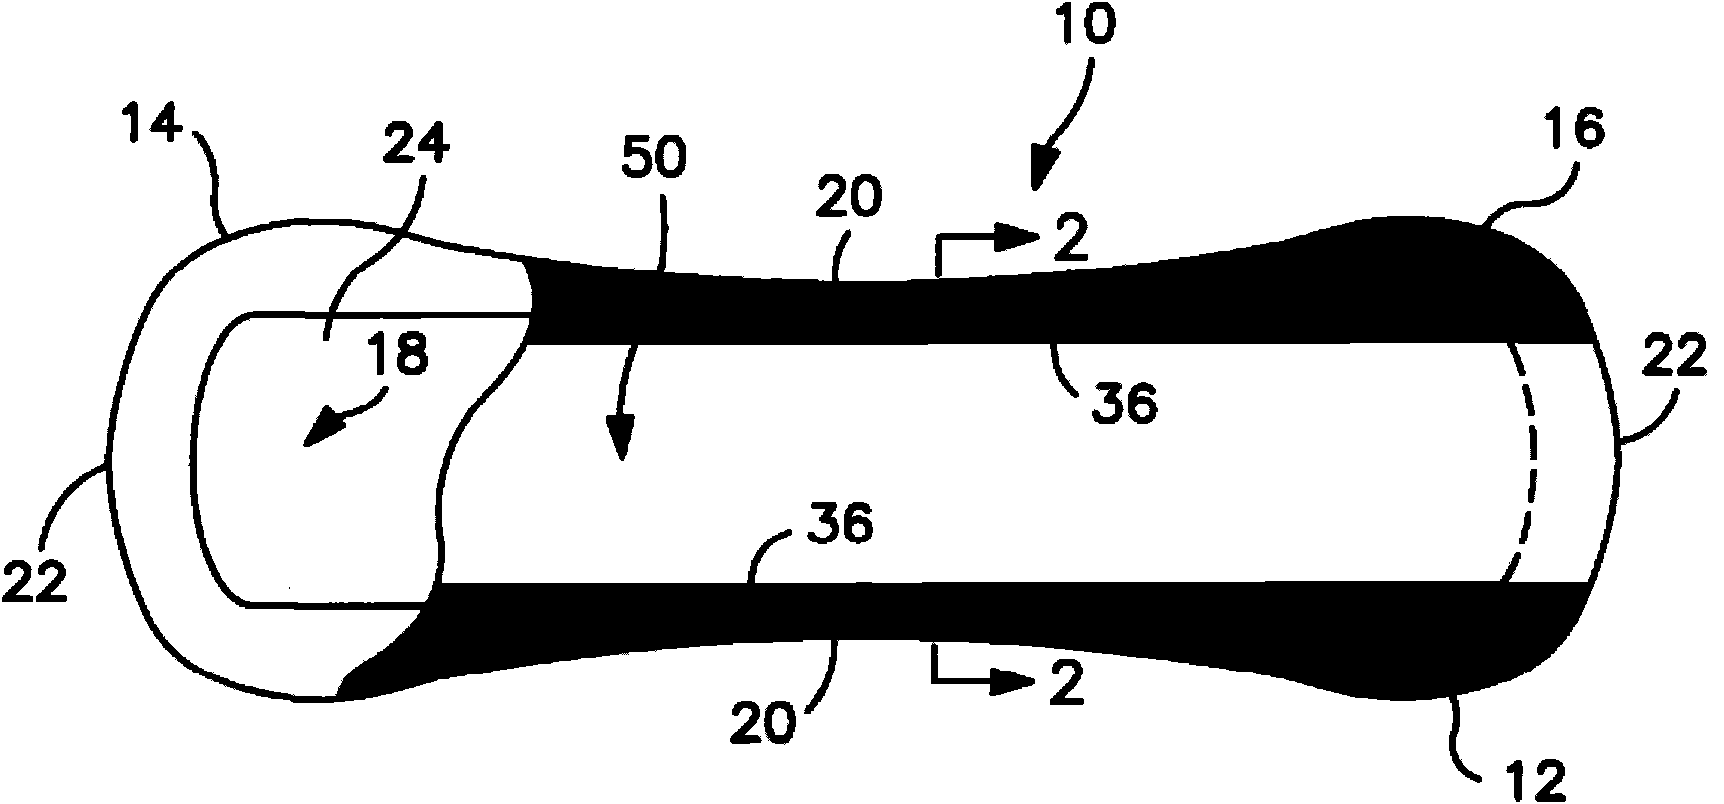 Zoned application of decolorizing composition for use in absorbent articles